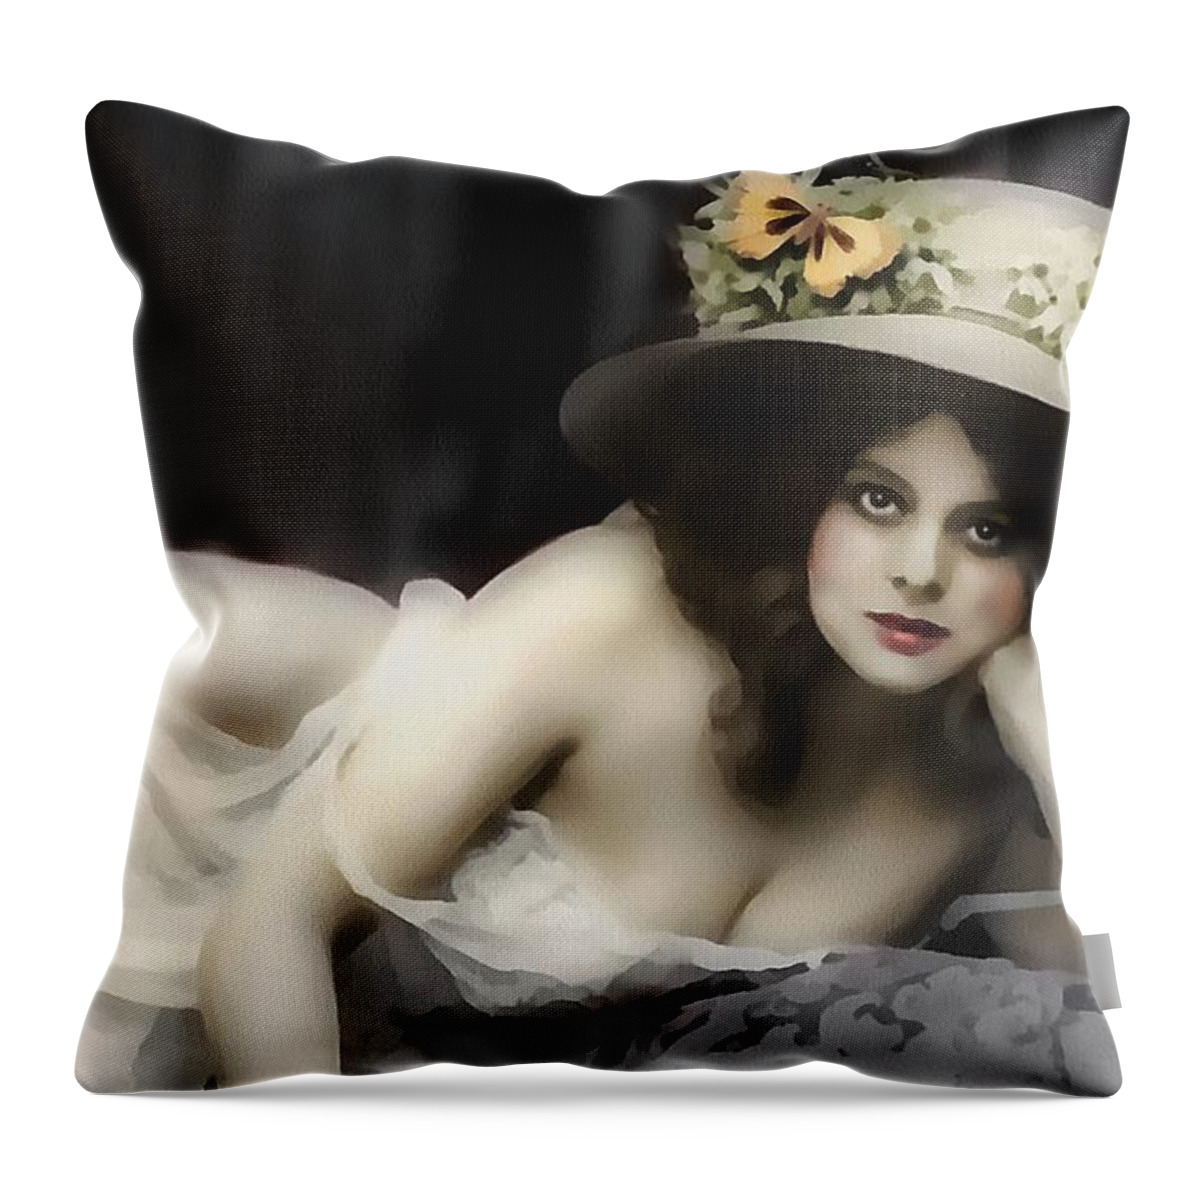 Woman Throw Pillow featuring the painting Will You Love Me In The Morning by Georgiana Romanovna